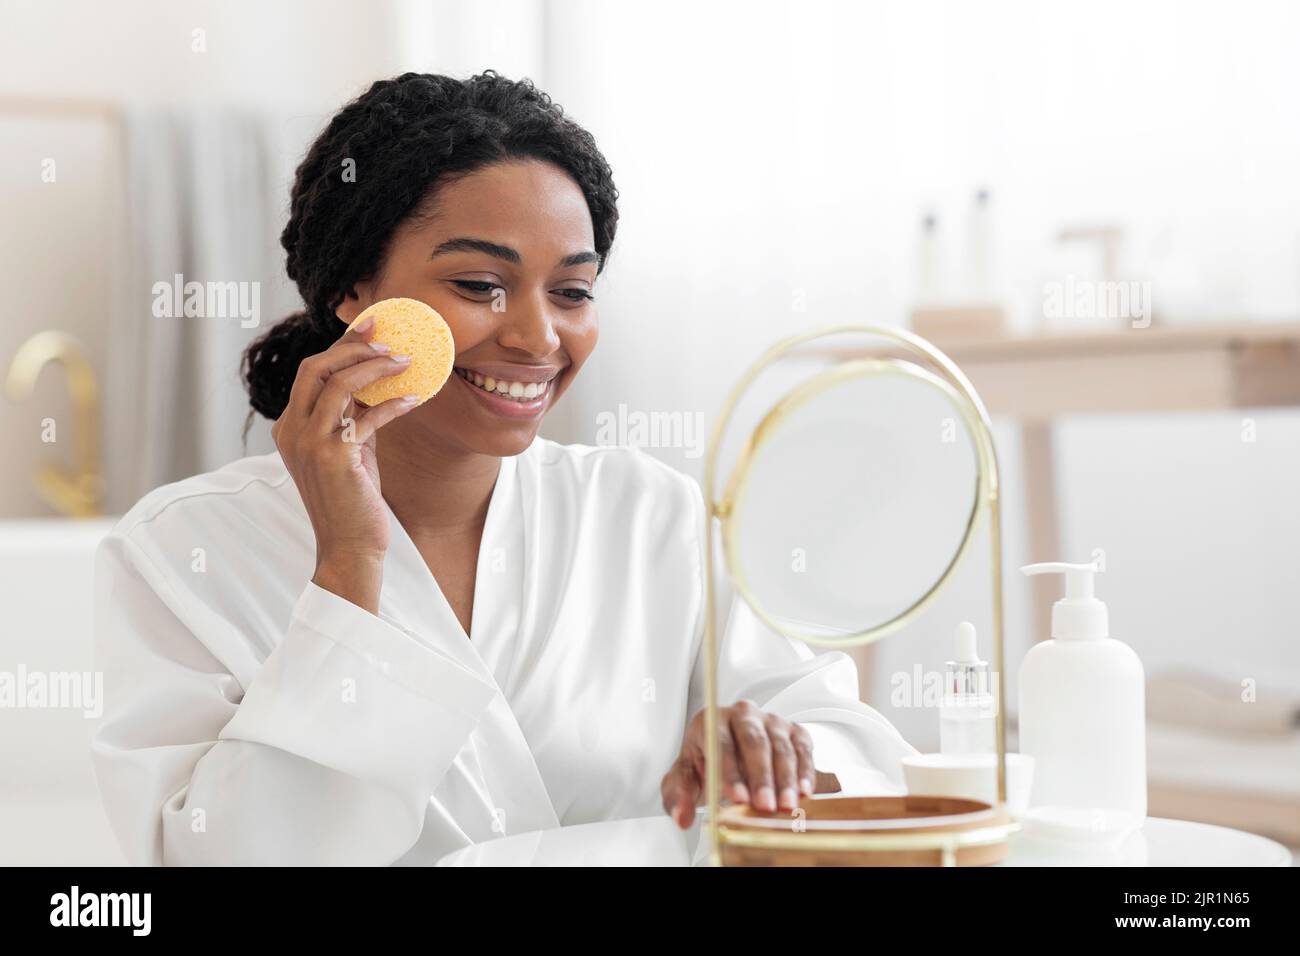 Beauty Routine. Smiling Black Female Cleansing Skin With Cosmetic Sponge At Home Stock Photo